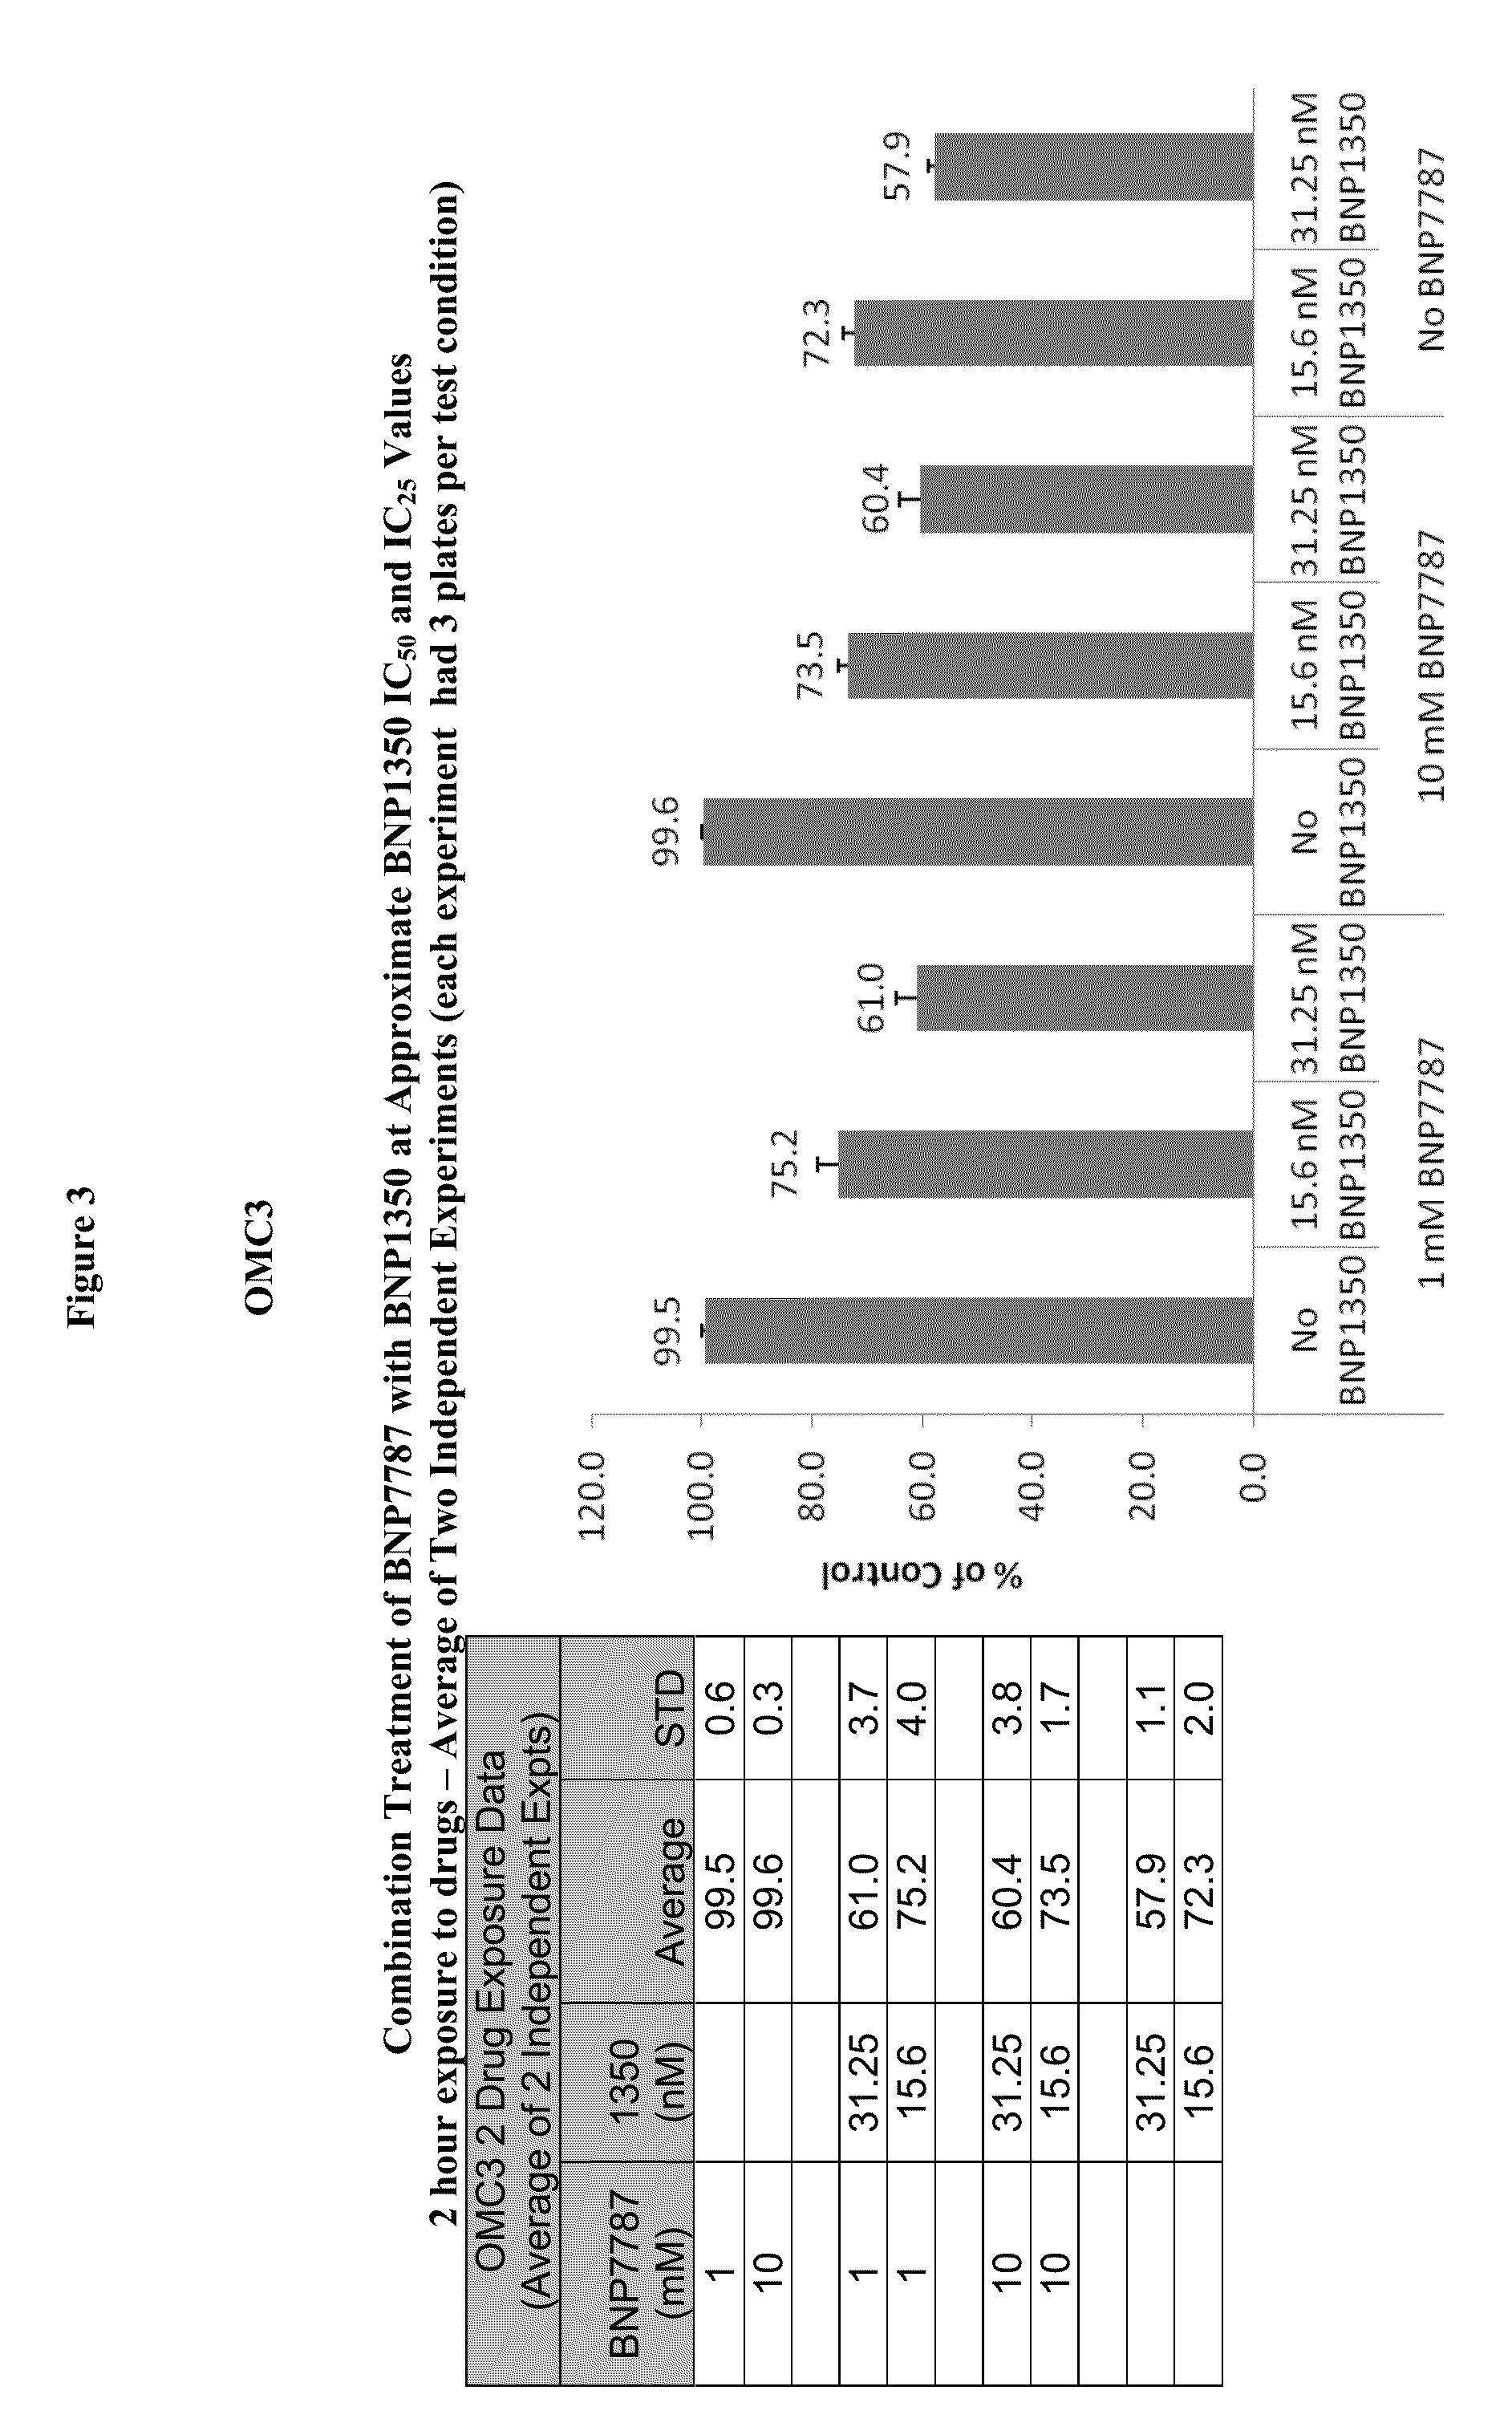 Administration of karenitecin for the treatment of advanced ovarian cancer, including chemotherapy-resistant and/or the mucinous adenocarcinoma sub-types